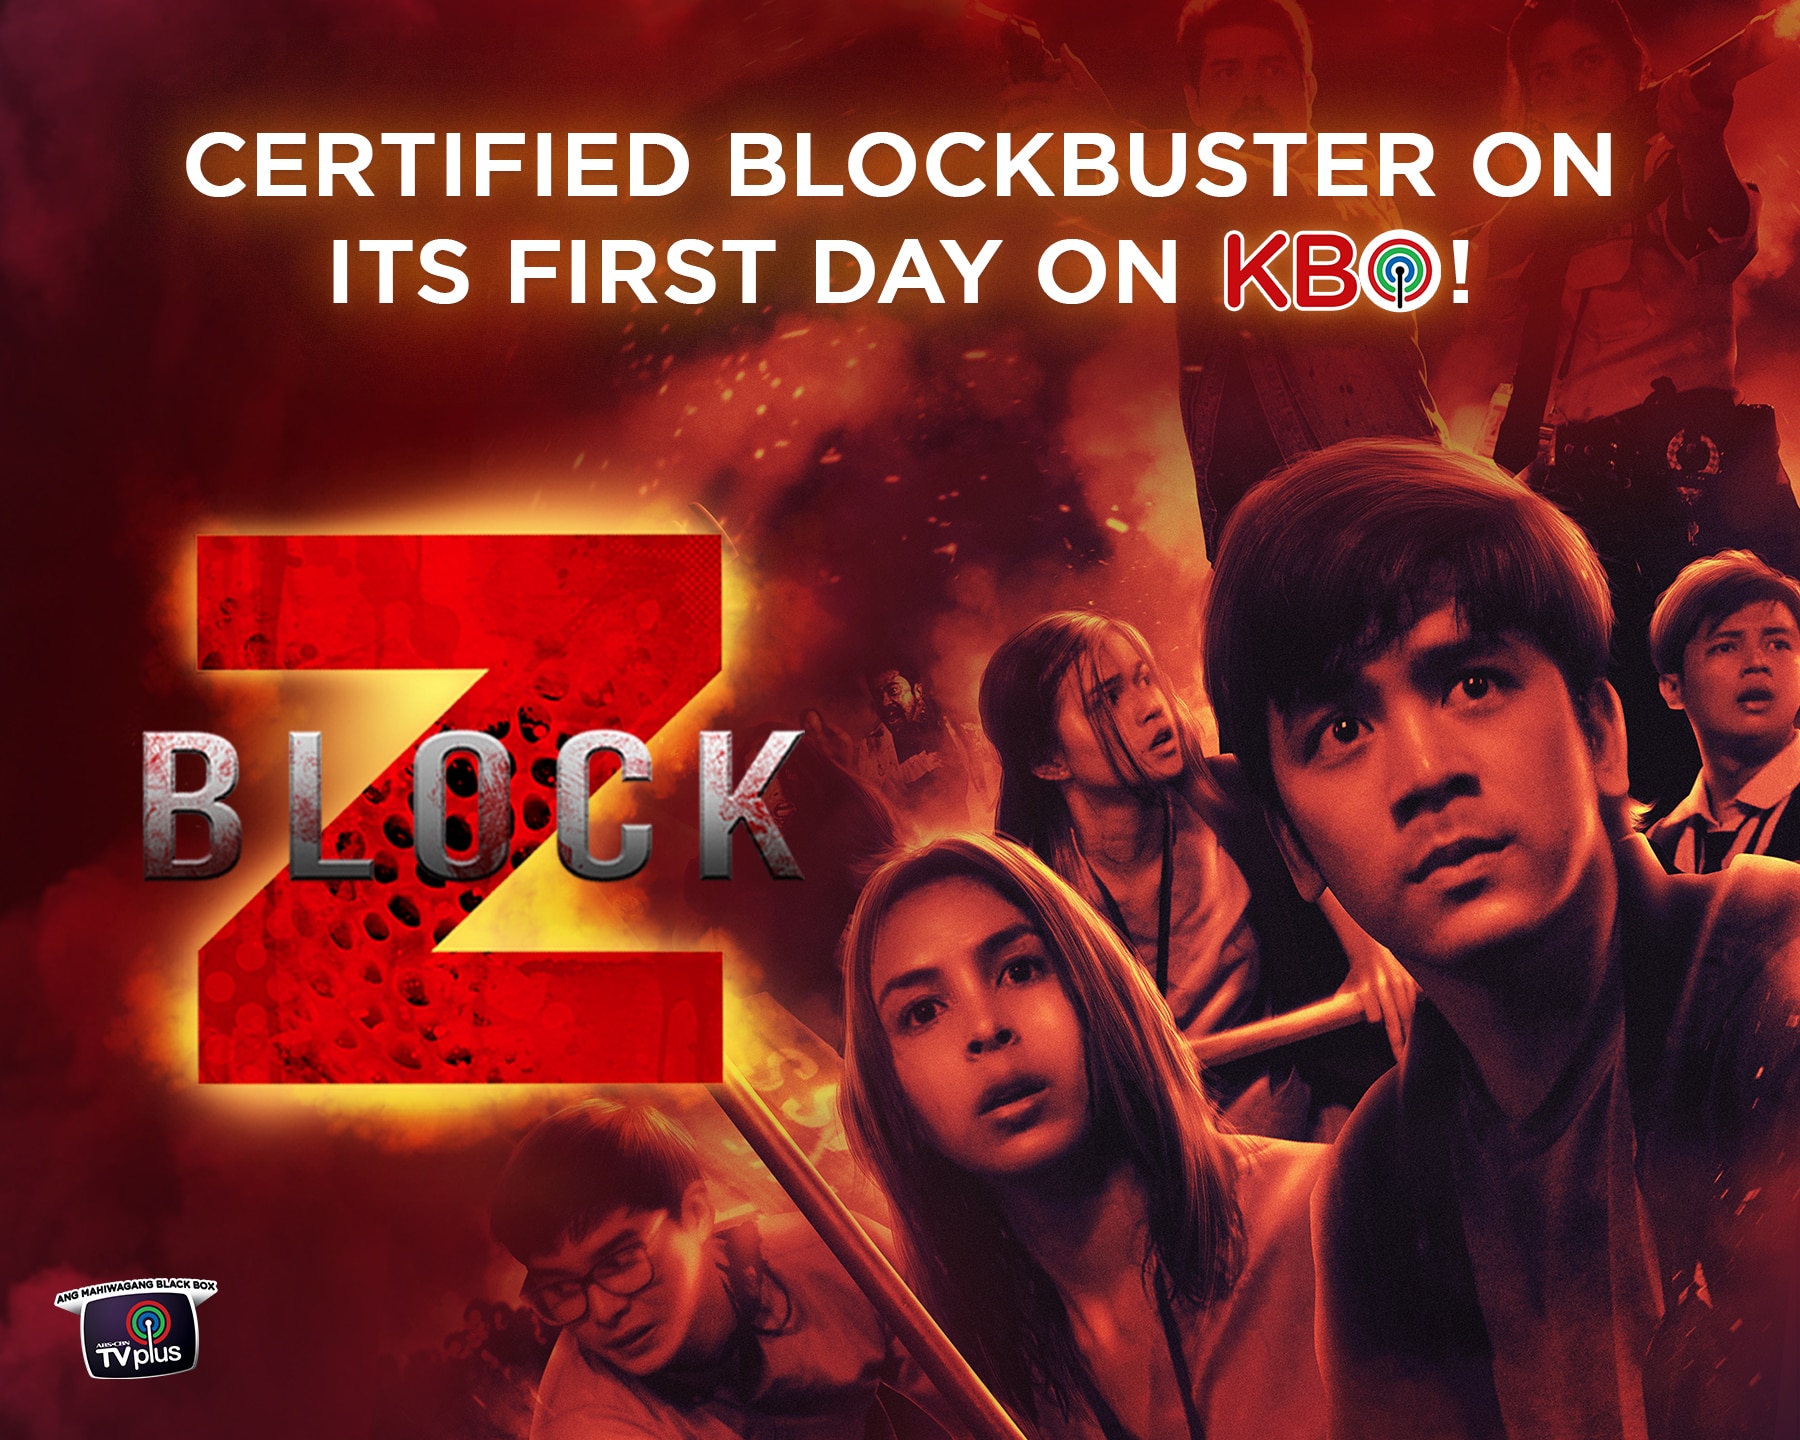 TV premiere of "Block Z," a certified blockbuster hit on its first day on KBO